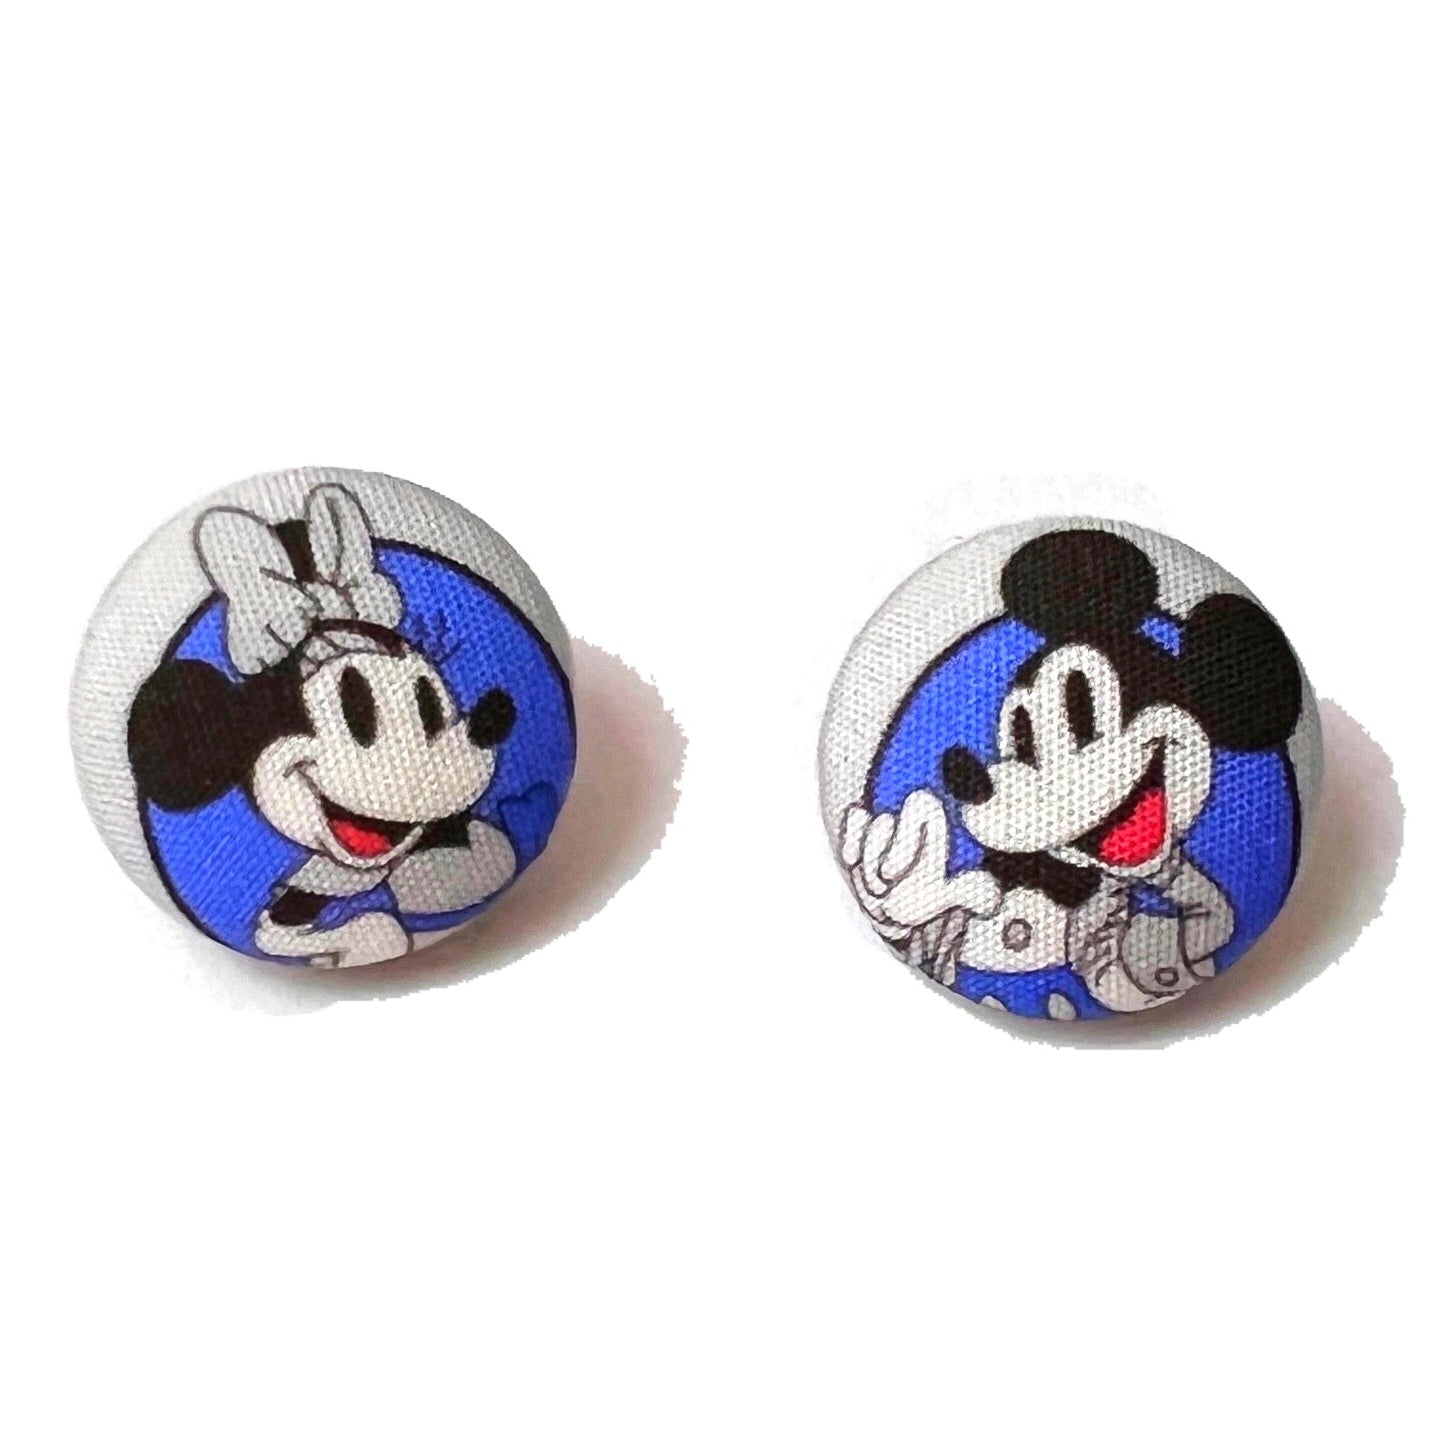 100 Celebration Mouse Fabric Button Earrings